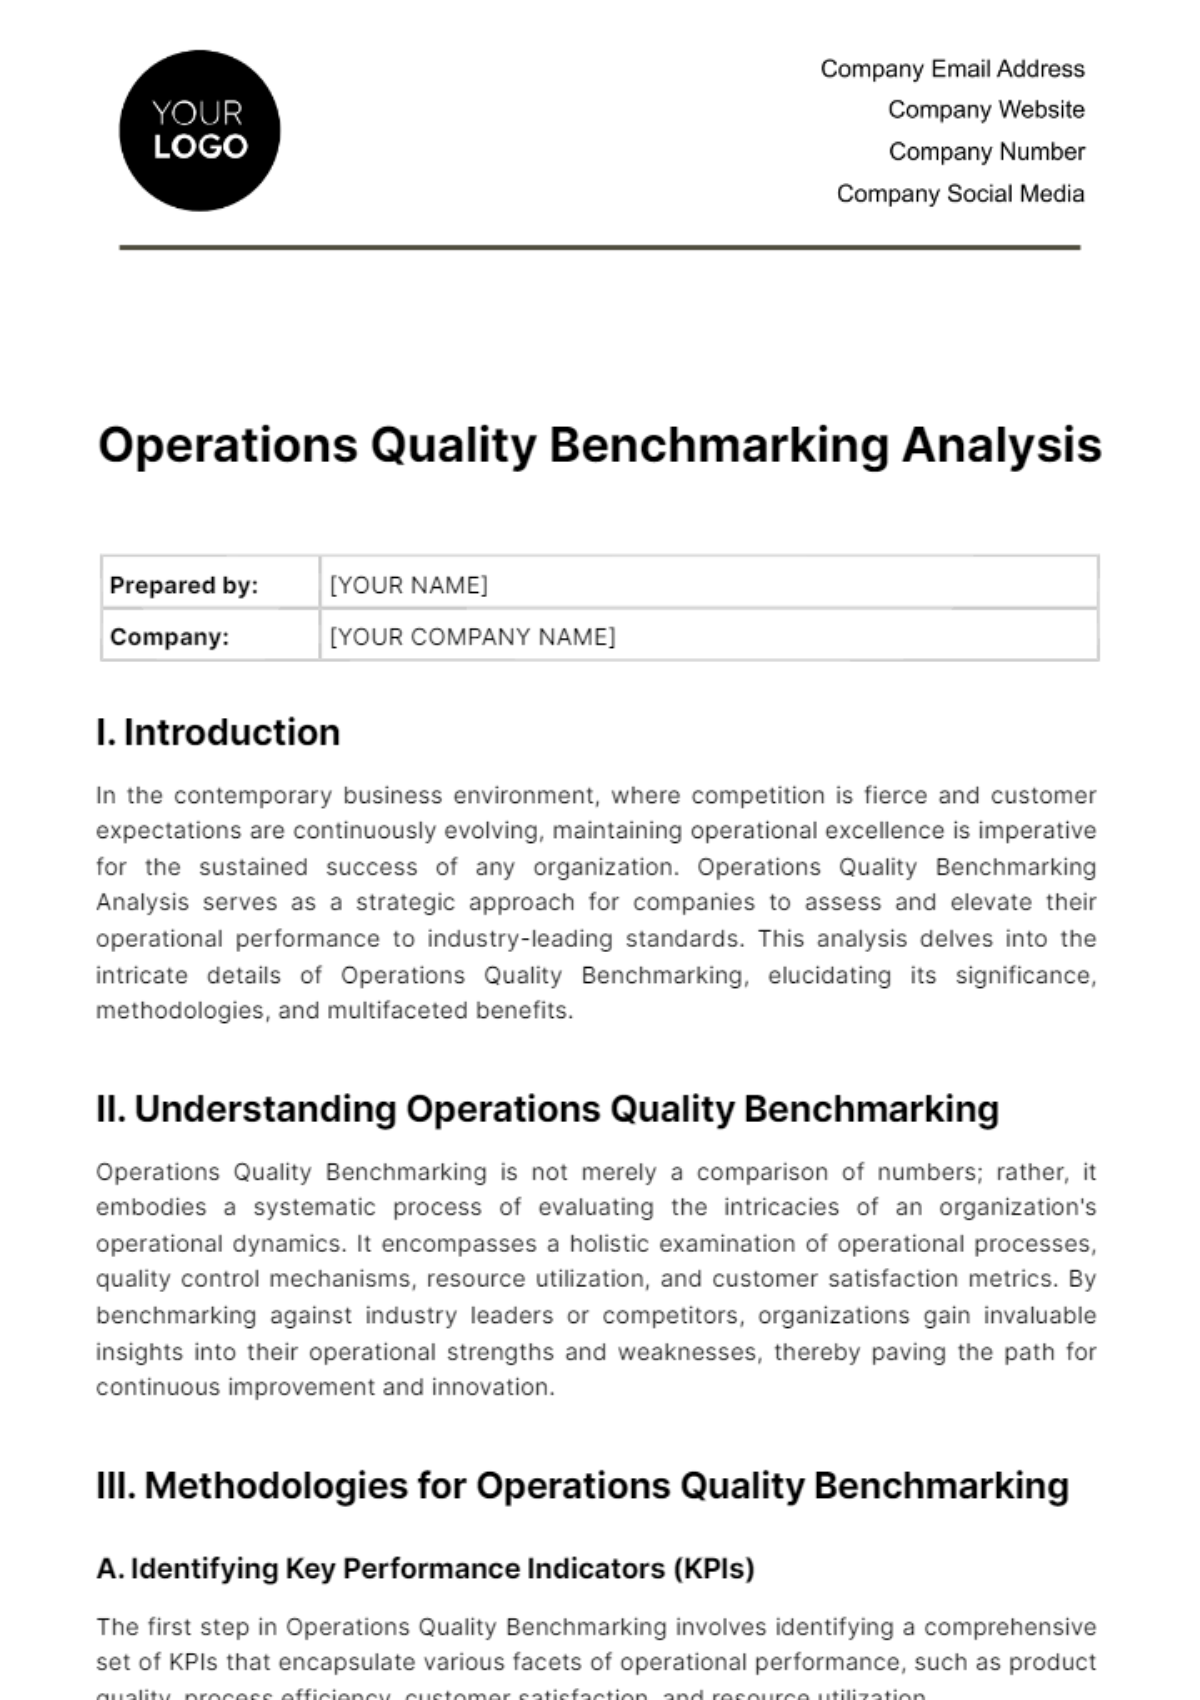 Free Operations Quality Benchmarking Analysis Template